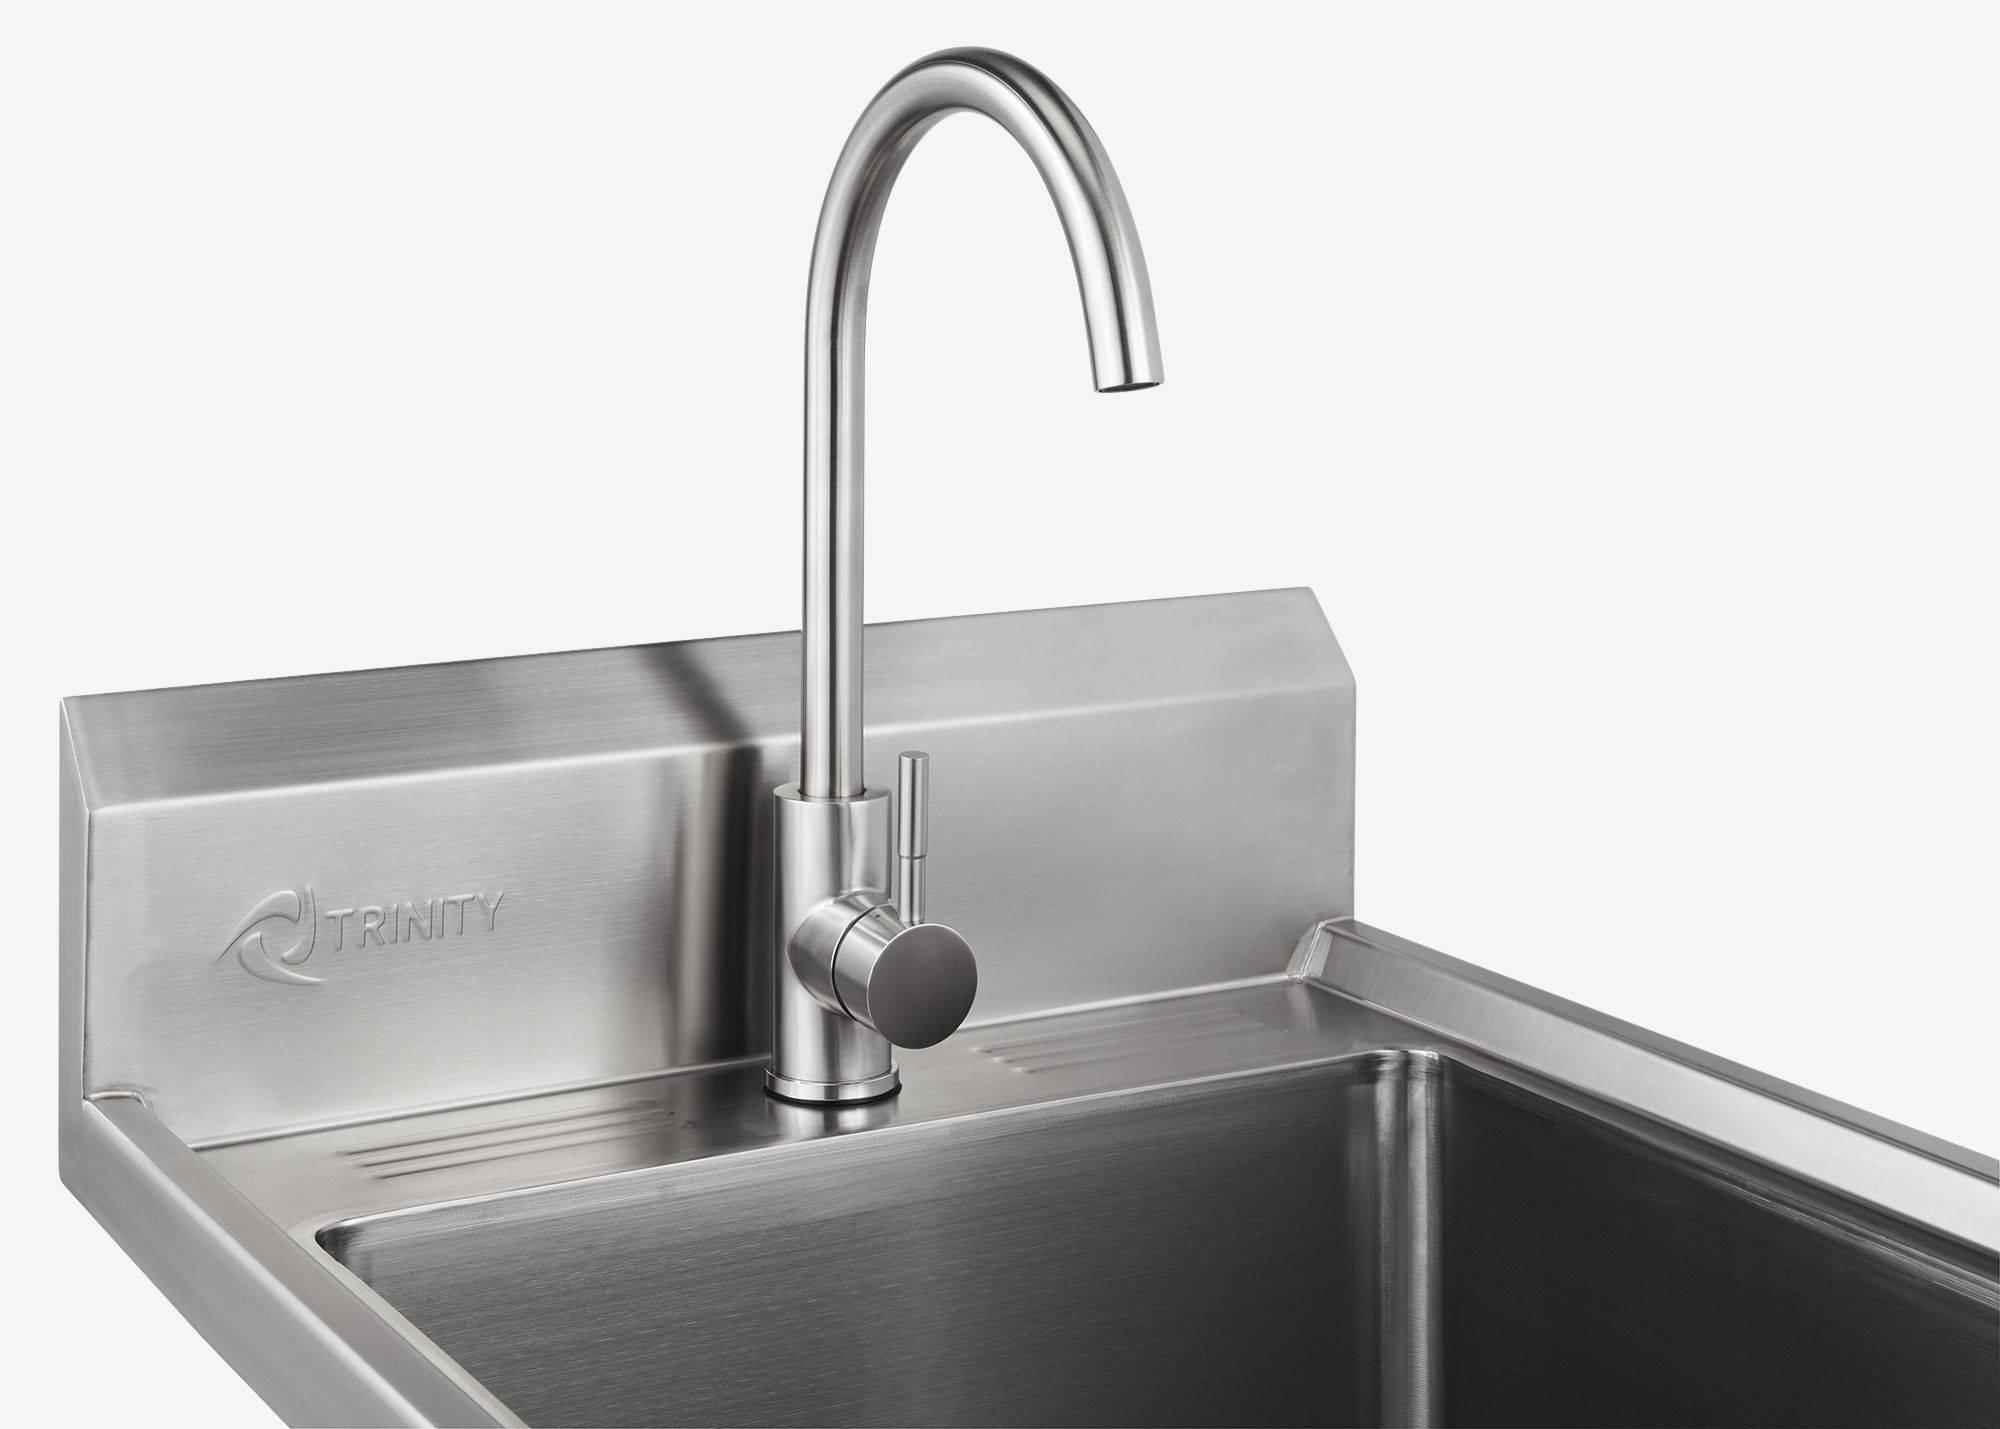 Stainless steel sink with trinity logo